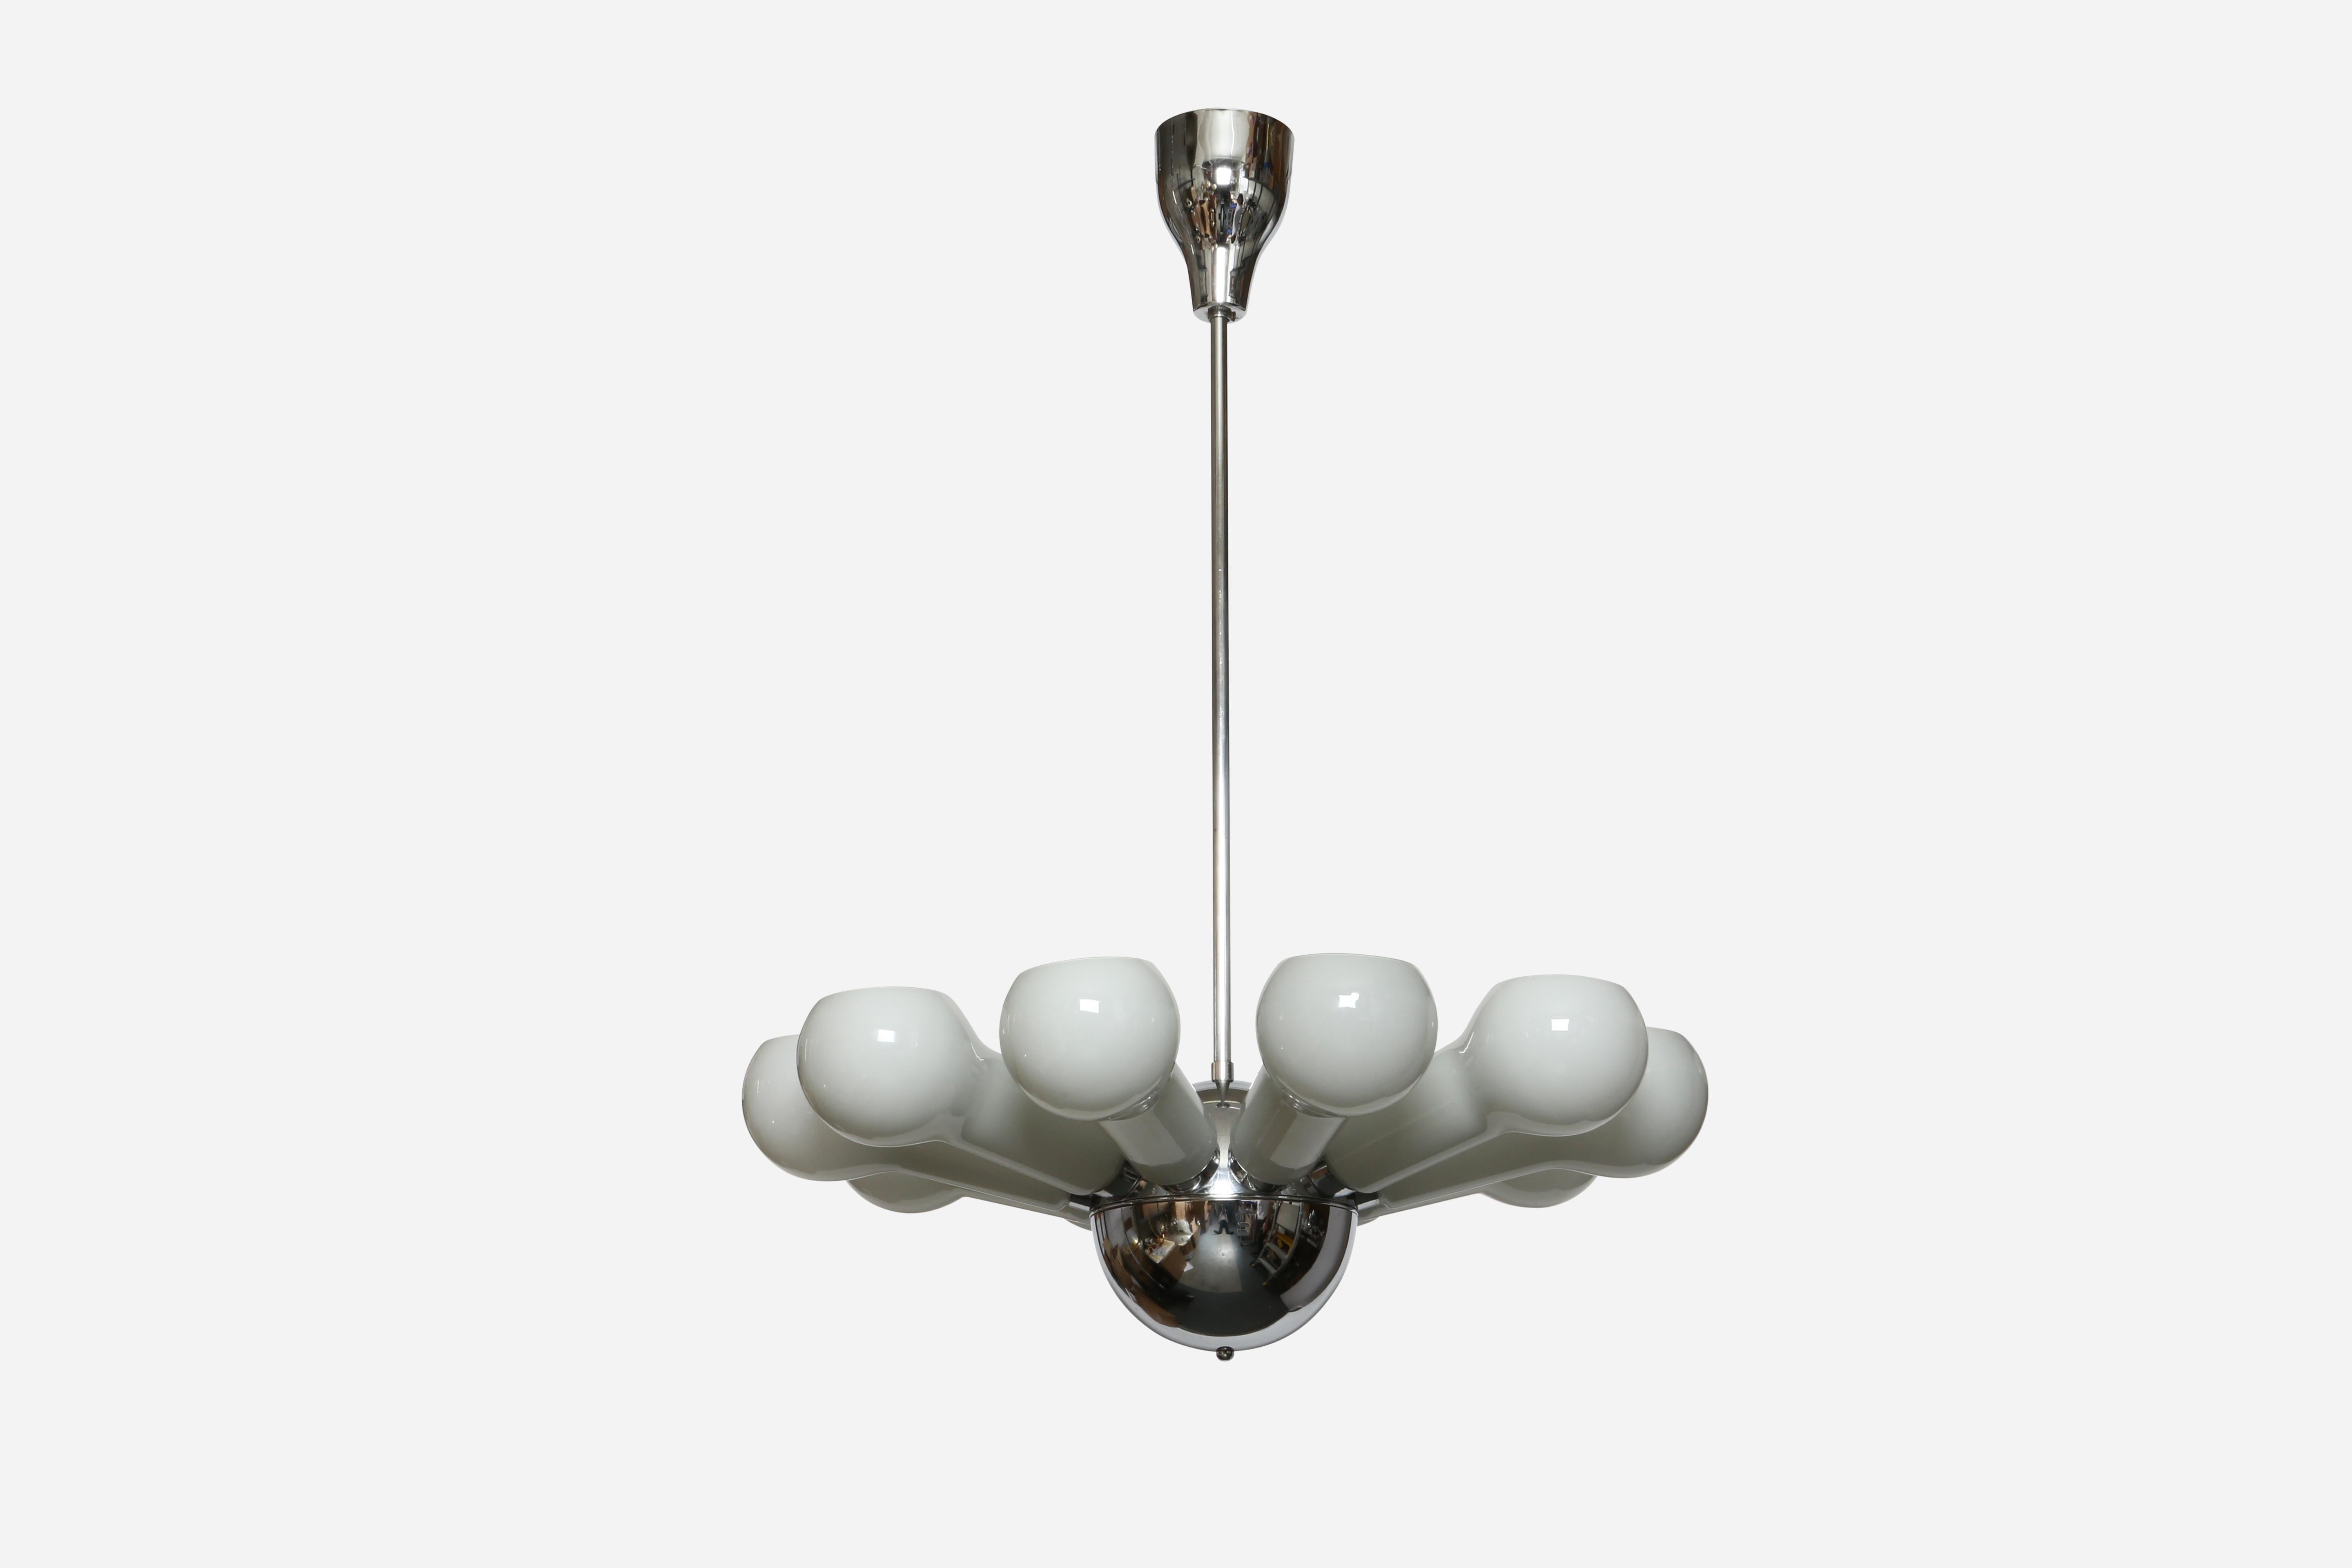 Vistosi chandelier, attributed.
Made in Italy, 1970s
Large and rare chandelier with 10 glass shades.
Glass is light grey on the outside and white inside.
10 candelabra sockets.
Complimentary US rewiring upon request.
Overall drop can be shorter.

We